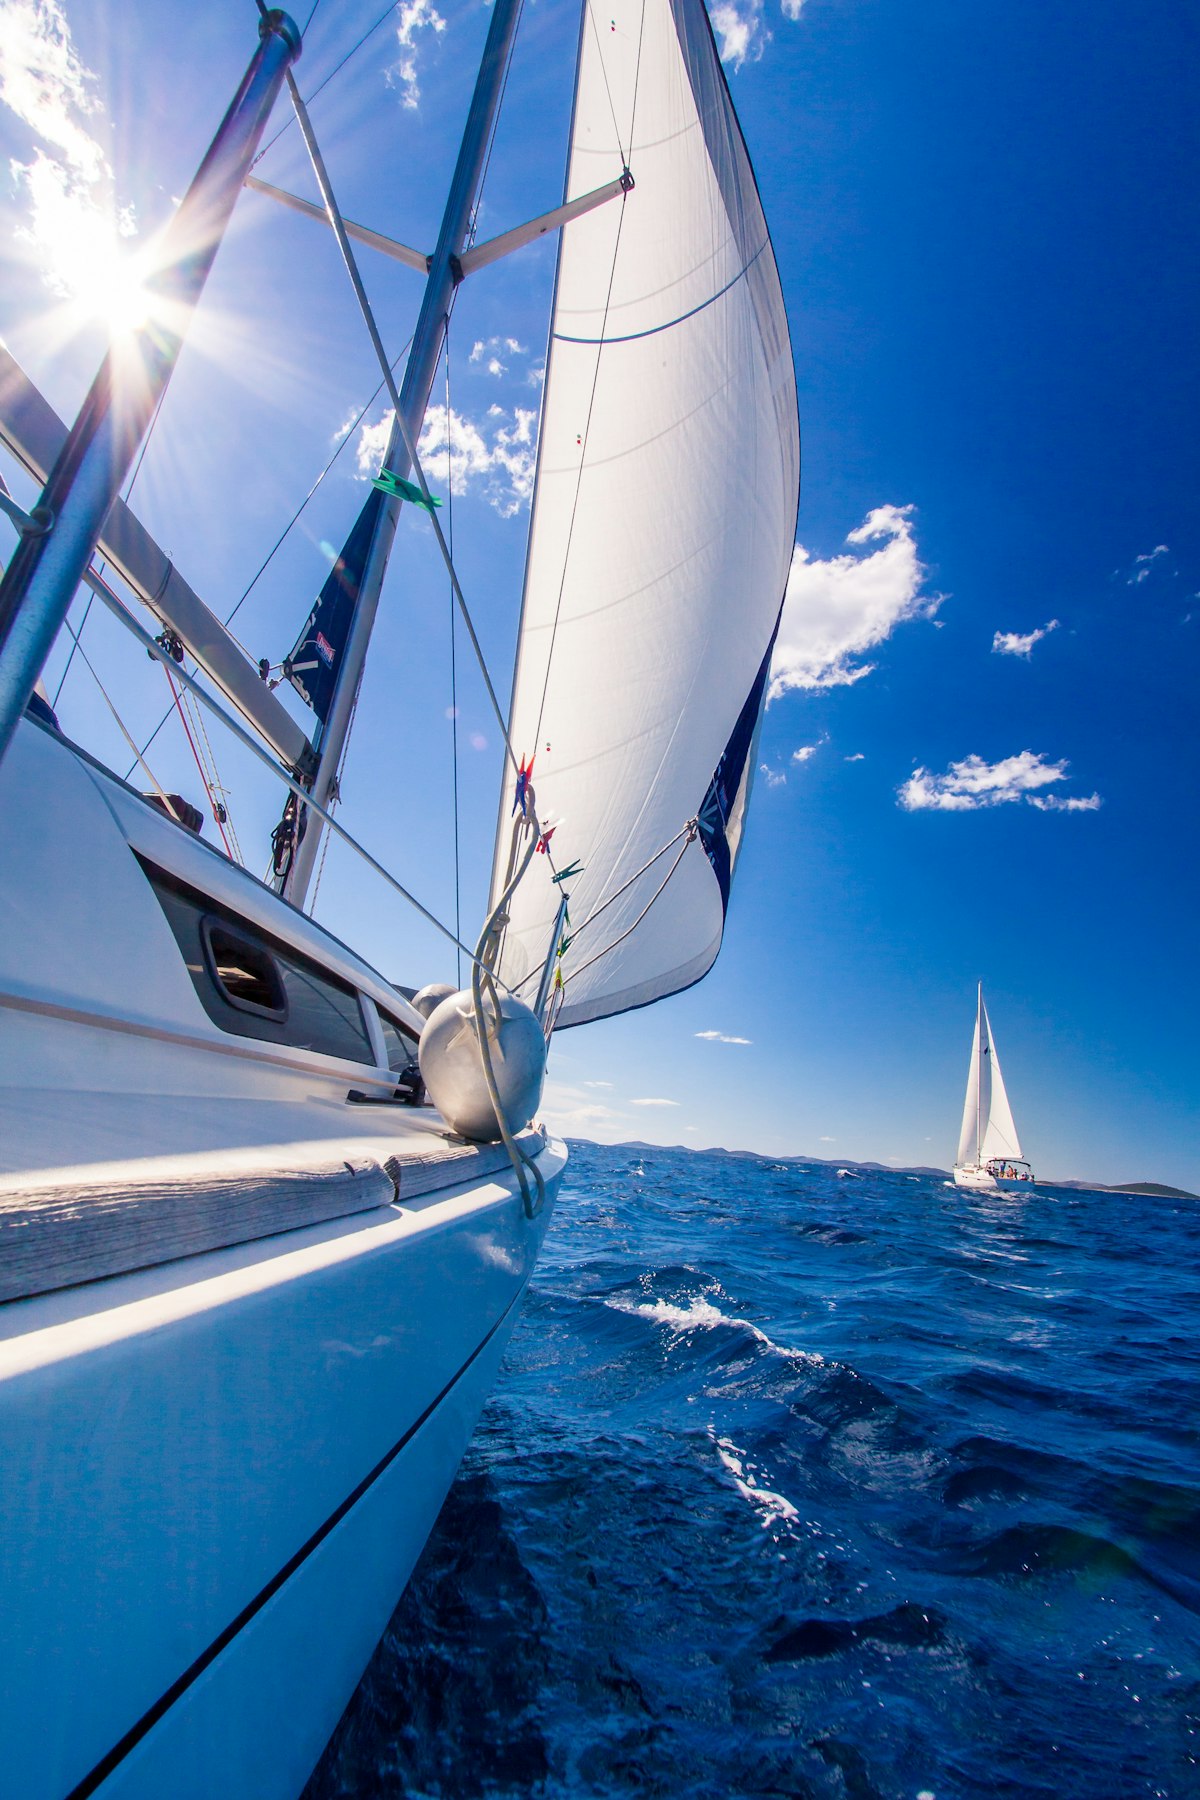 yachting che cosa significa